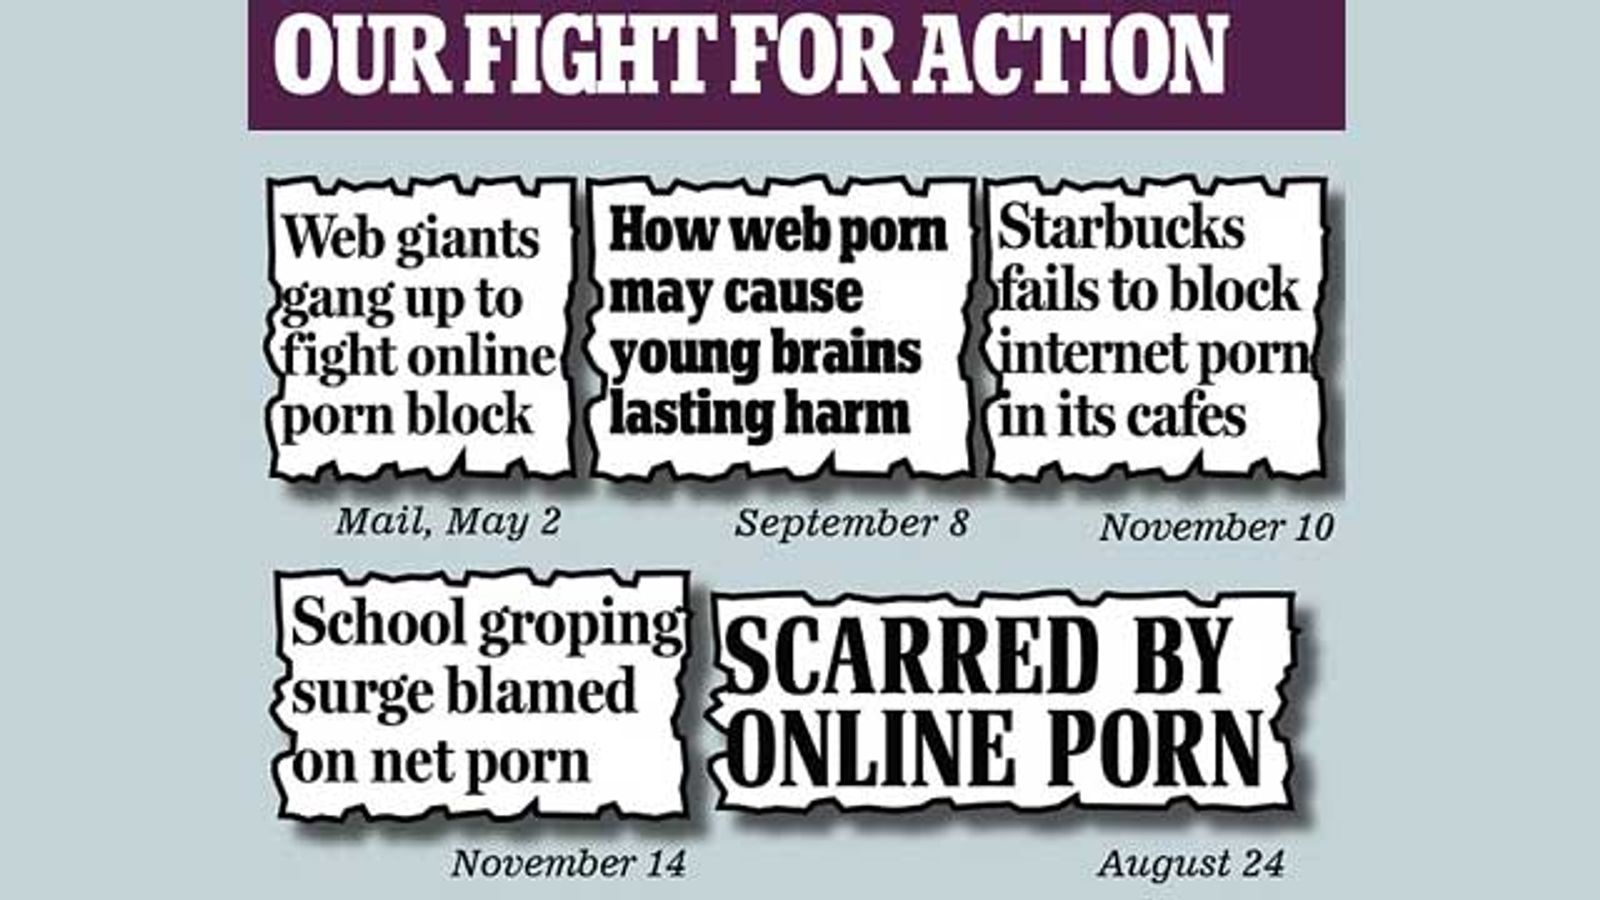 Daily Mail: Cameron to Force Online Filters on U.K. Parents